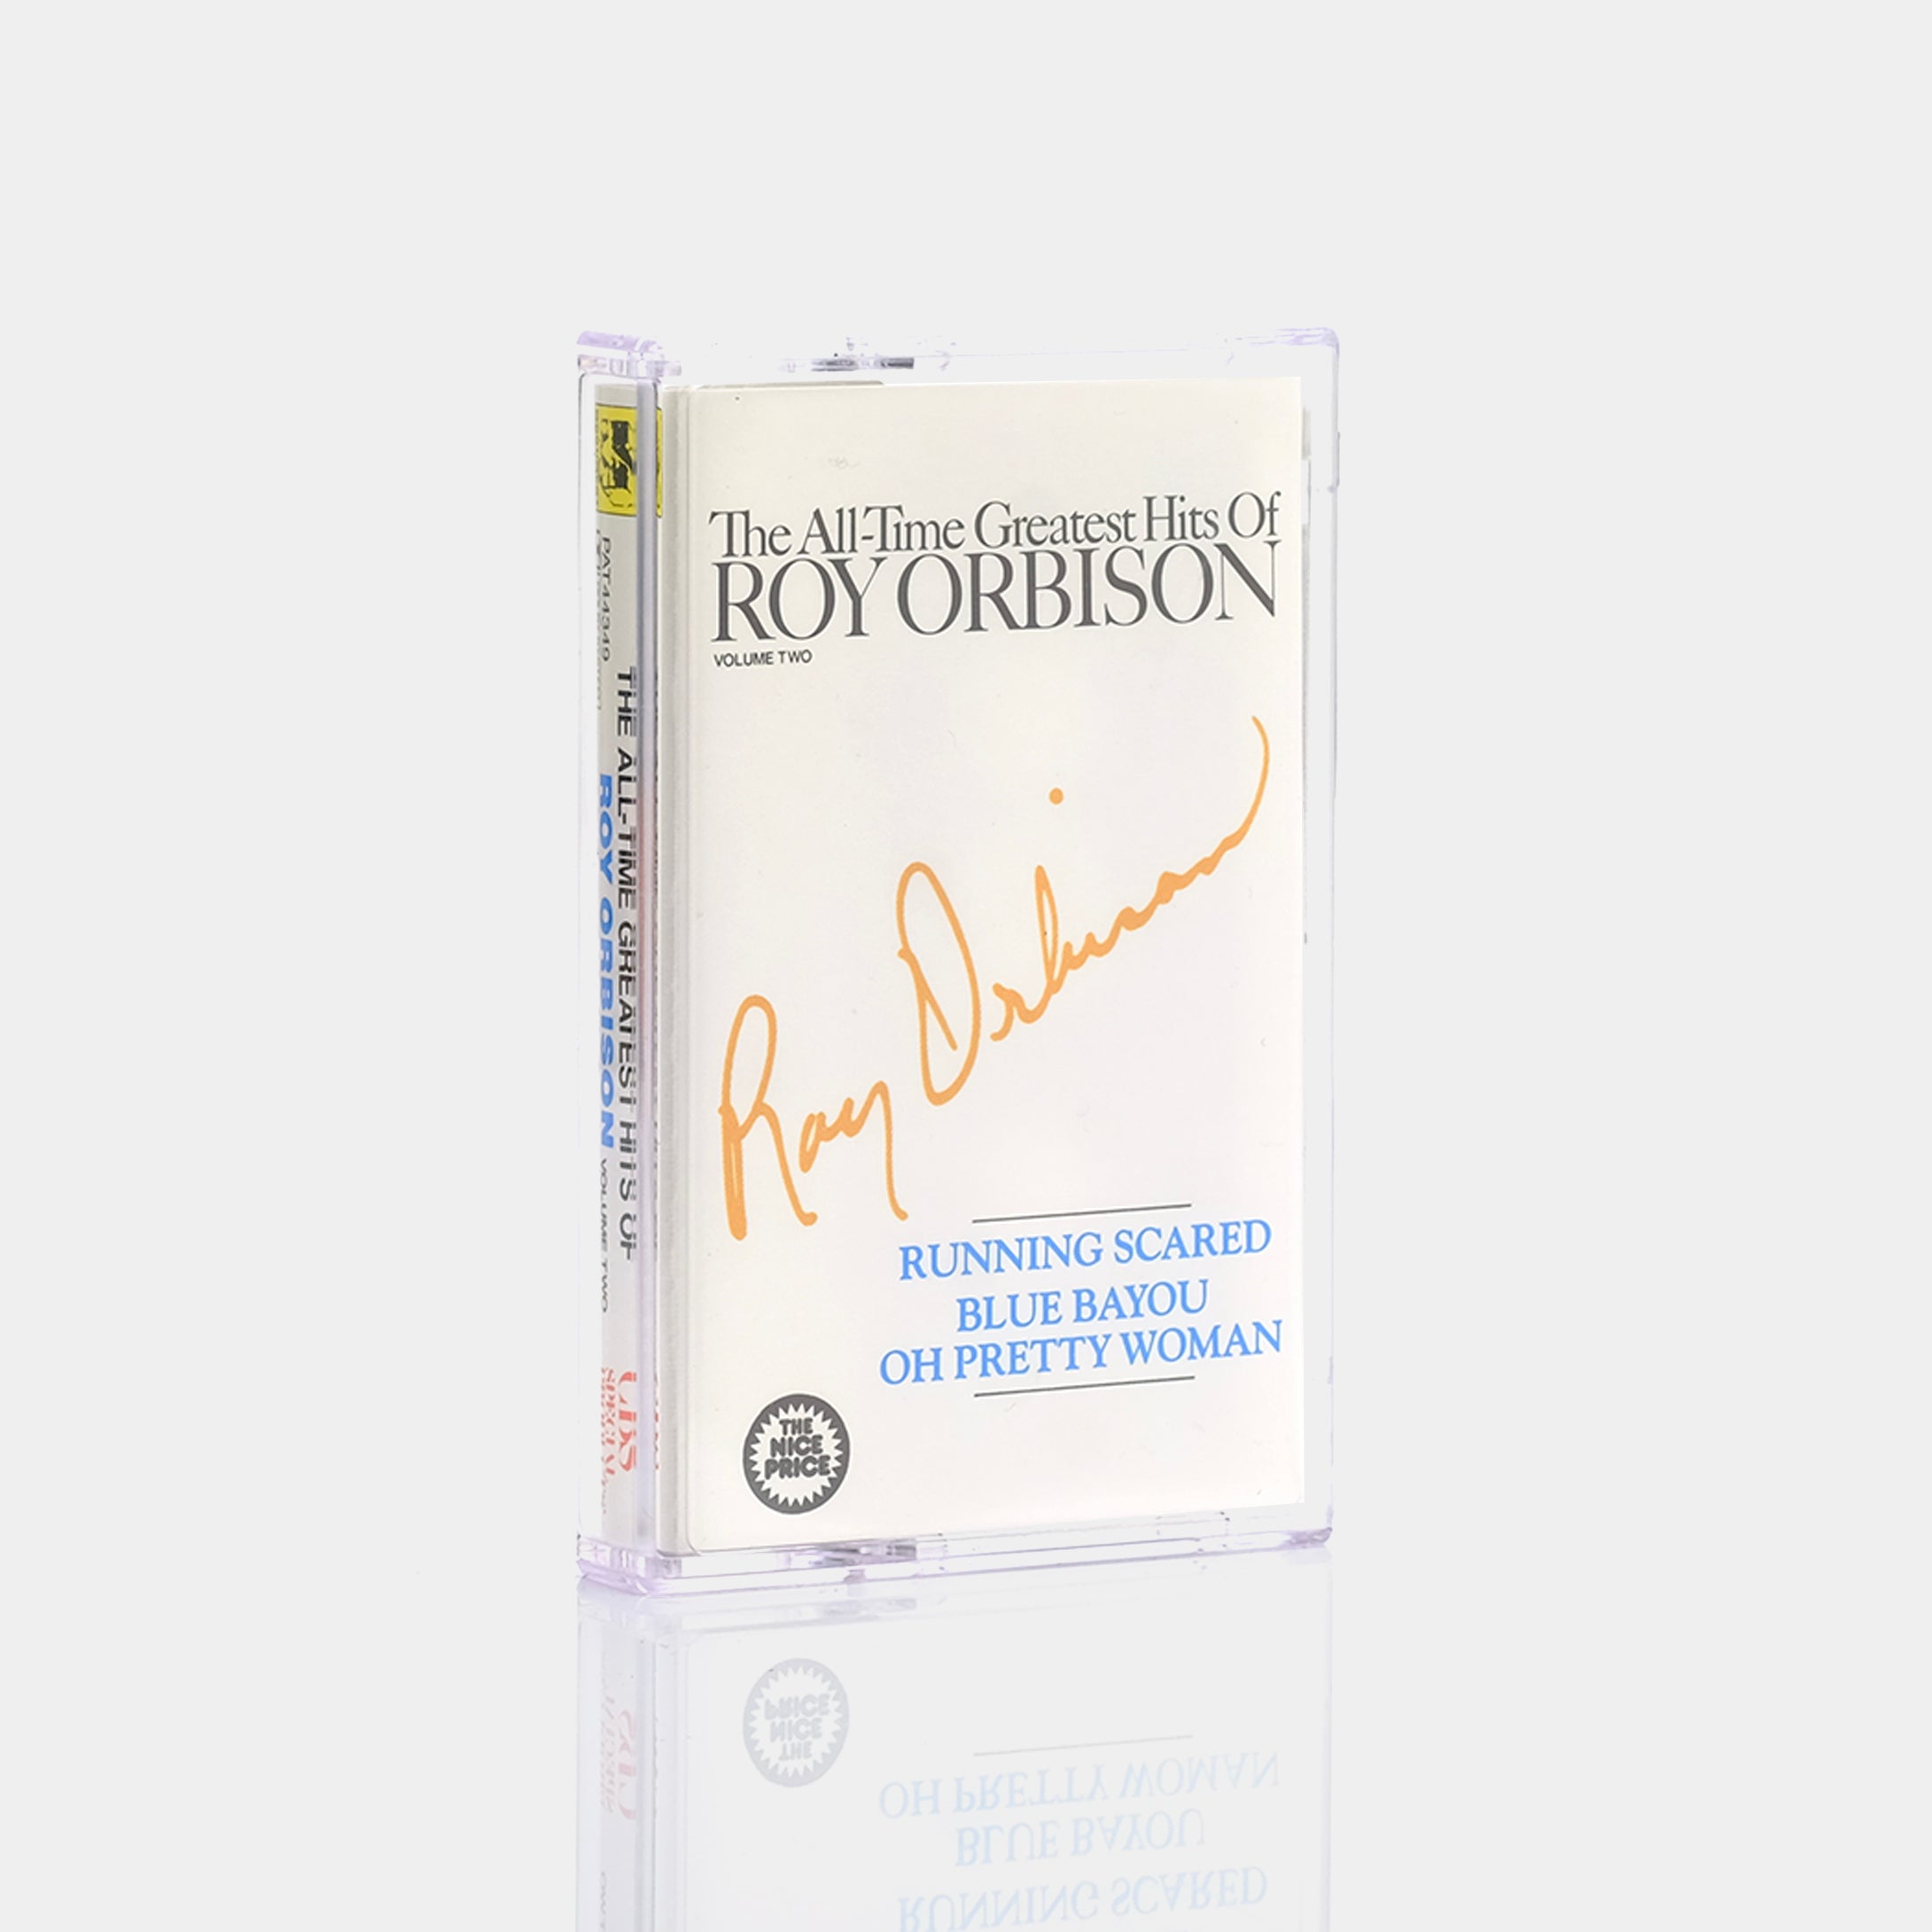 Roy Oribson - The All-Time Greatest Hits of Roy Orbison Vol. II Cassette Tape